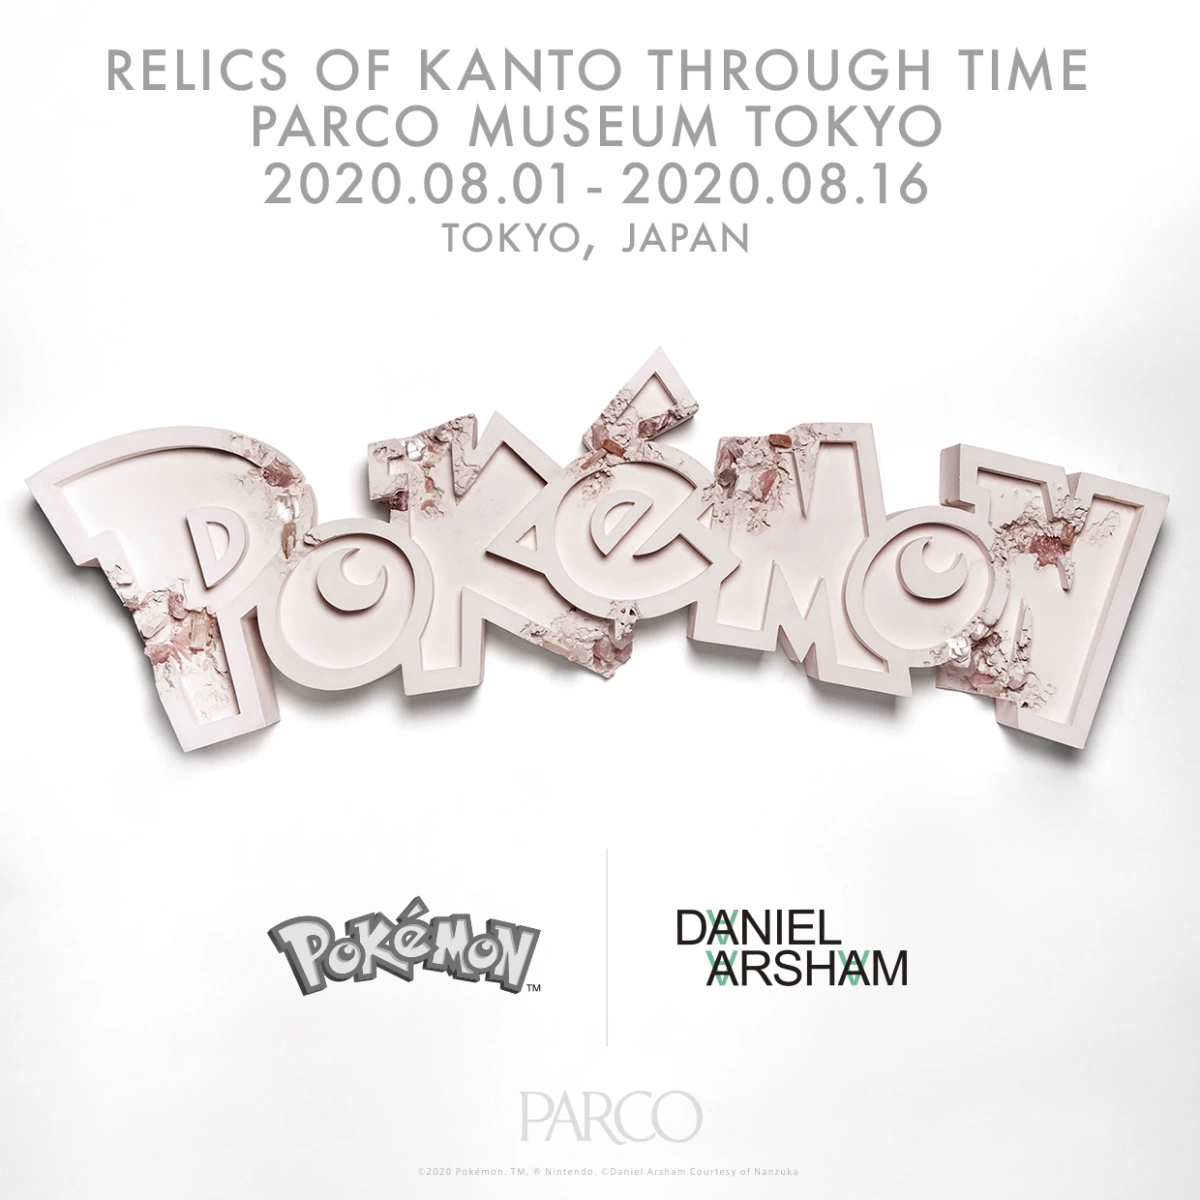 Relics of Kanto Through Time at PARCO MUSEUM TOKYO